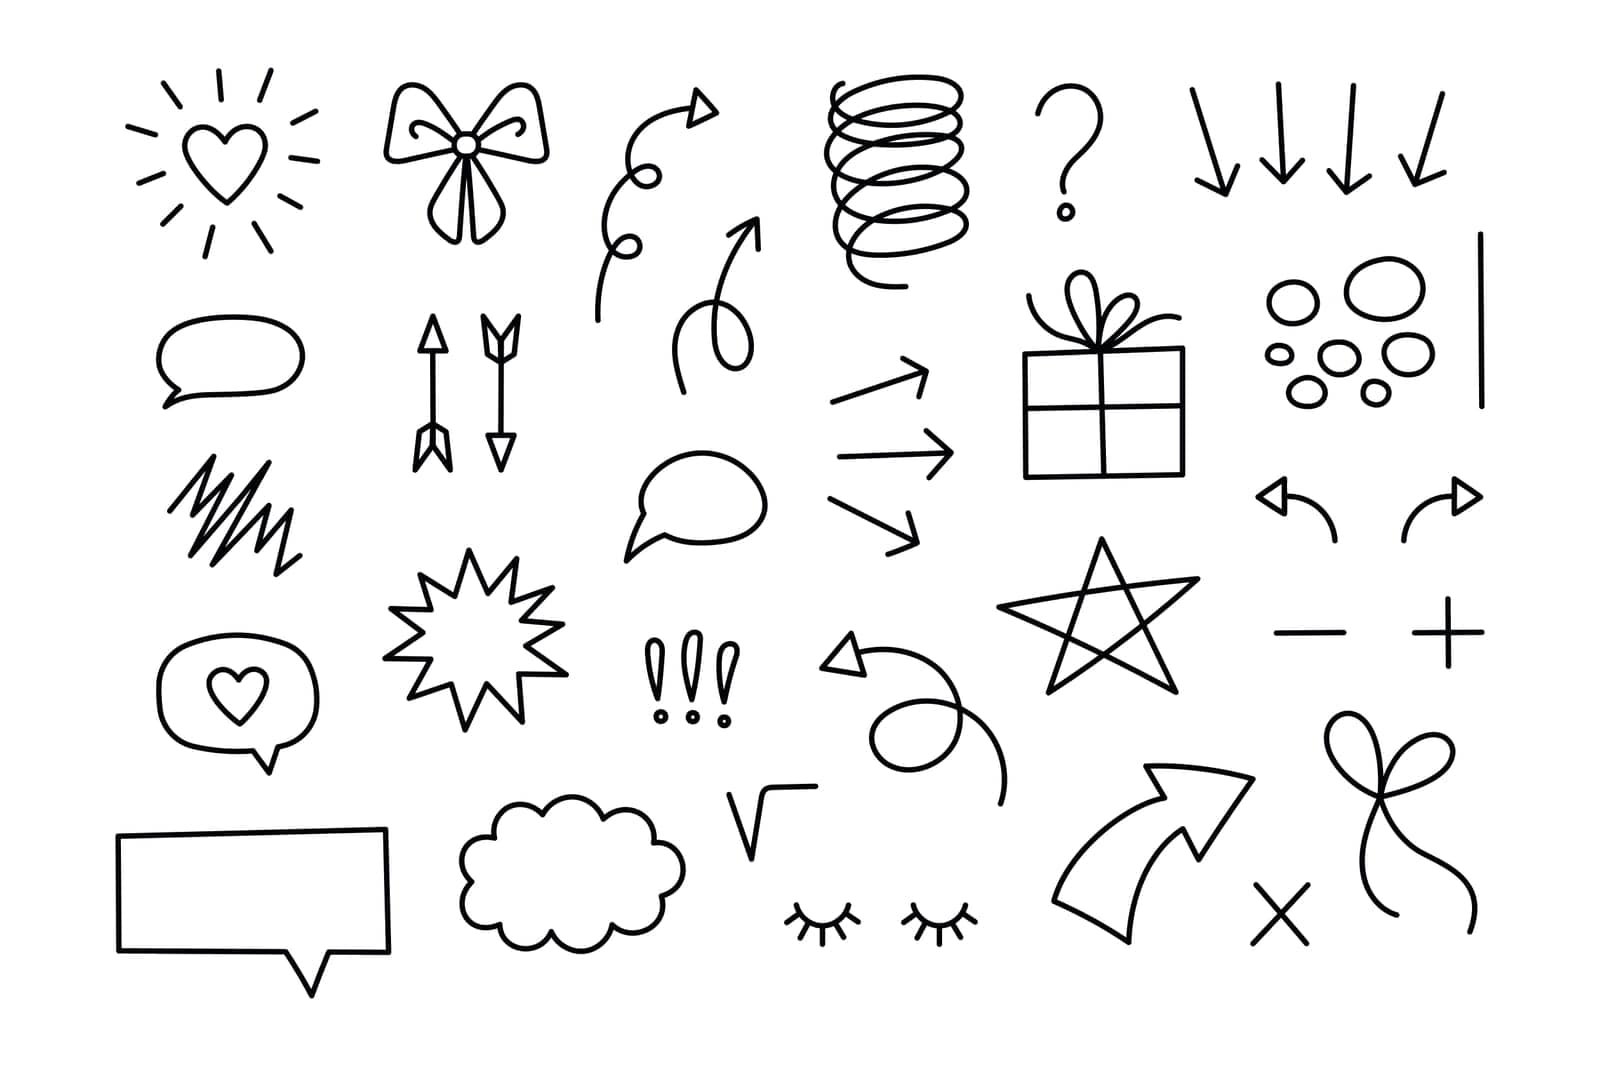 Hand drawn doodle elements set. Cartoon illustrations on white background. Doodle icons. Hand drawn Abstract shapes. Doodles of hearts, ribbons, bows, stars, gifts, arrows.